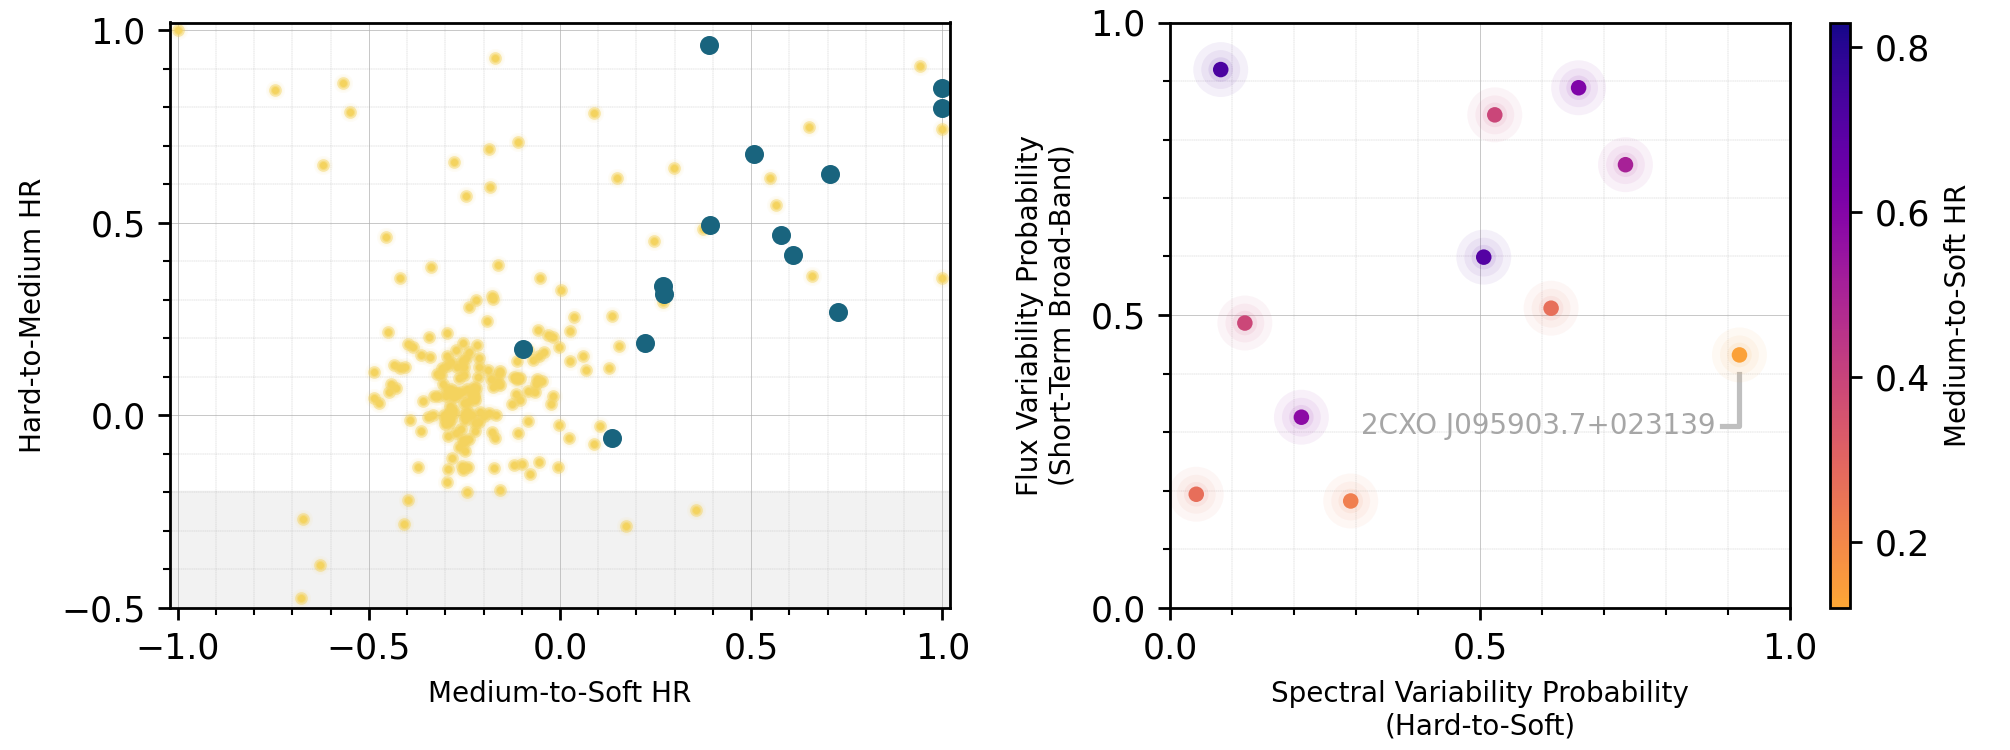 Fig 1, Left: A scatter plot with blue and yellow points. The Y-Axis is labeled “Hard-to-Medium HR” and stretches from -0.5 to 1.0. The X-Axis is labeled “Medium-to-Soft HR” and stretches from -1.0 to 1.0. The plot is shaded light gray below y values of -0.2. Most yellow points are clustered around x=-0.25, y=0, although there are some that extend to larger values of both. 14 blue points are plotted, up and to the right of the yellow clump, scattered around an unseen line stretching to x=1, y=1. Fig 1, Right: A scatter plot with a color bar, showing 11 points, one of which is labeled. The Y-Axis is labeled “Flux Variability Probability (Short Term-Broad-Band)”, and stretches from 0.0 to 1.0. The X-Axis is labeled “Spectral Variability Probability (Hard-to-Soft)”, and also stretches from 0.0 to 1.0. The Colorbar is labeled “Medium-to-Soft HR” and stretches from just below 0.2 (with an orange color), up through a purple color, and finally ends with a dark blue just above a value of 0.8. 9 points are mostly along the 1:1 line of the two plotted values. One is near x=0.1, y=0.9. The final point, labeled “2CXO J095903.7+023139” is near x=0.9, y=0.45.